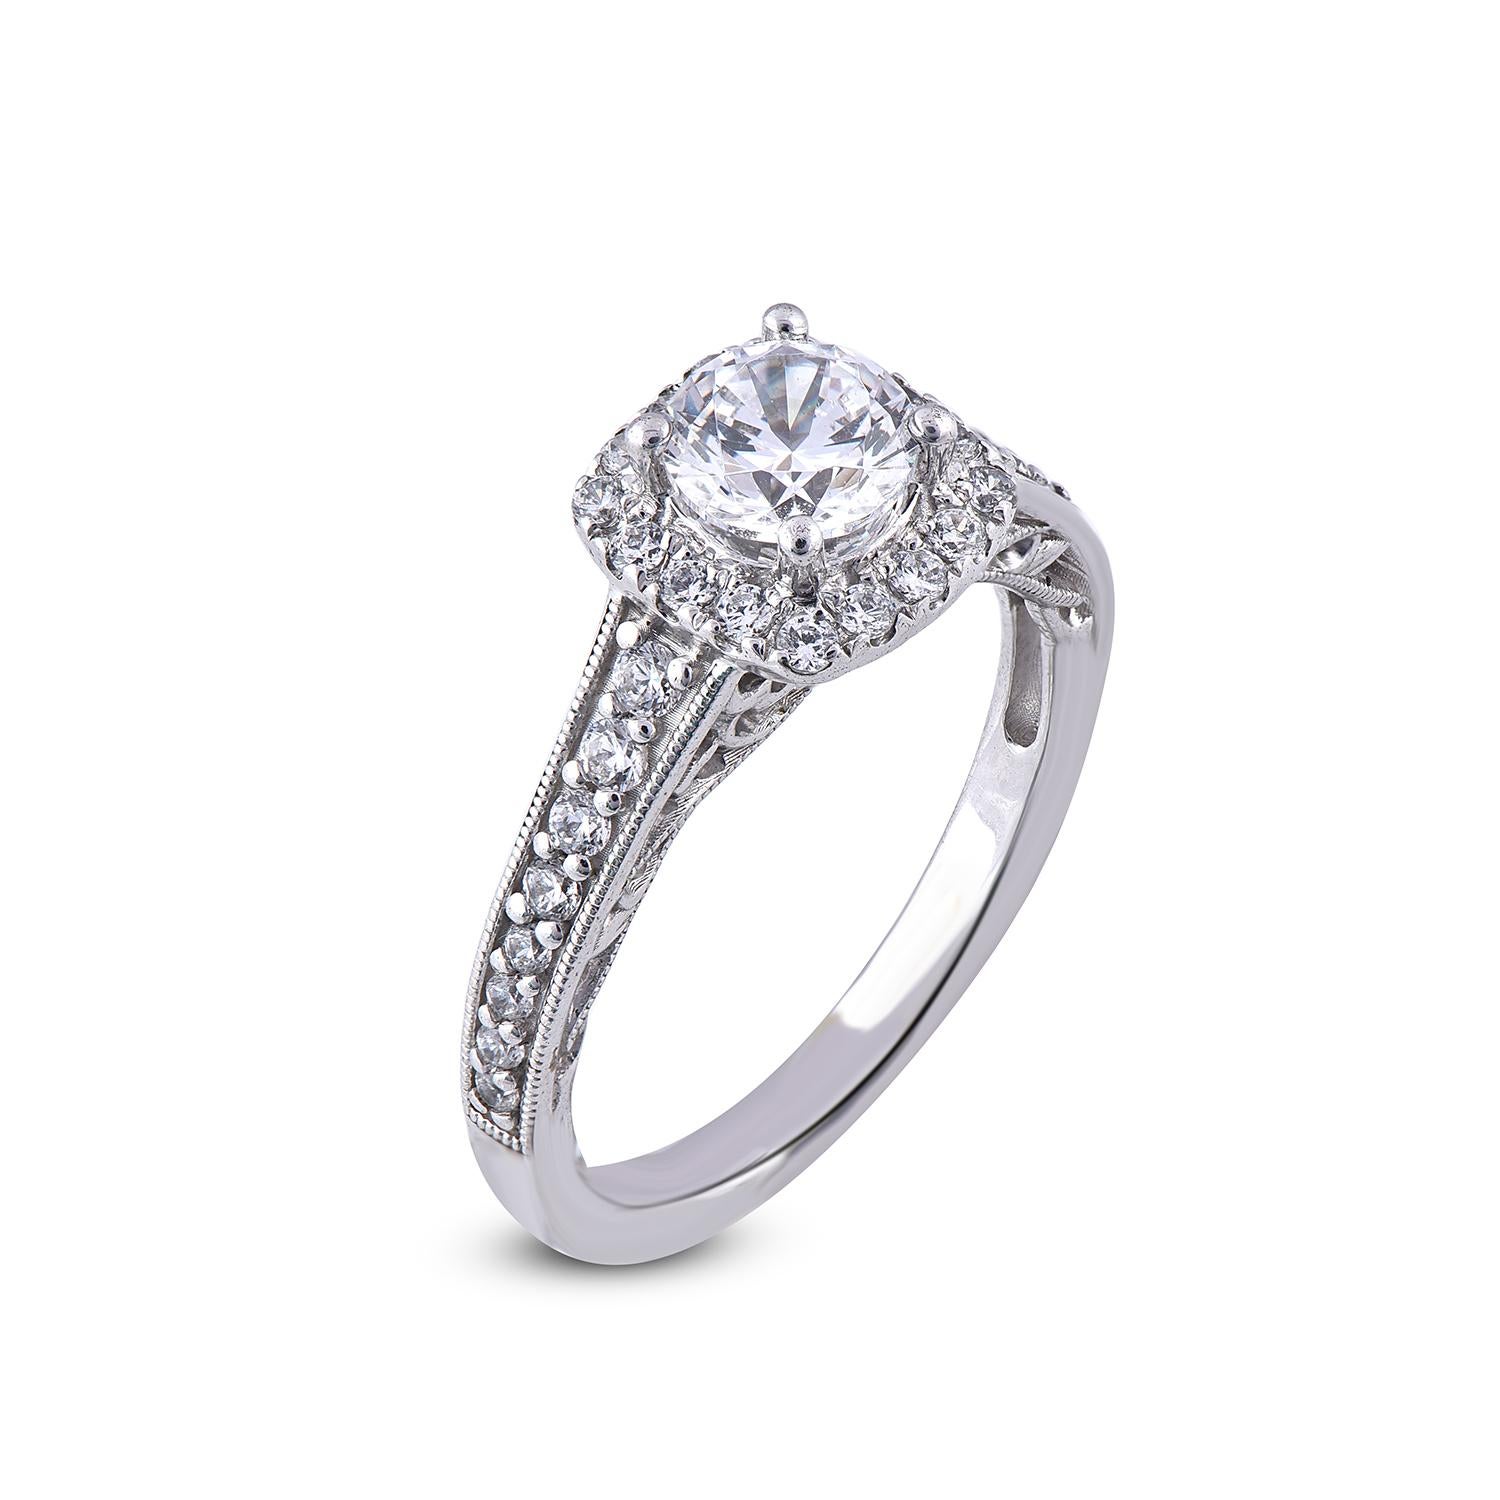 Exquisite diamond engagement ring features 0.80 ct centre stone and 0.45 ct of diamond frame and shank lined diamonds. Expertly Crafted of sparkling 18 Karat white gold in high polish finish and set with 33 sparkling round diamonds set in prong